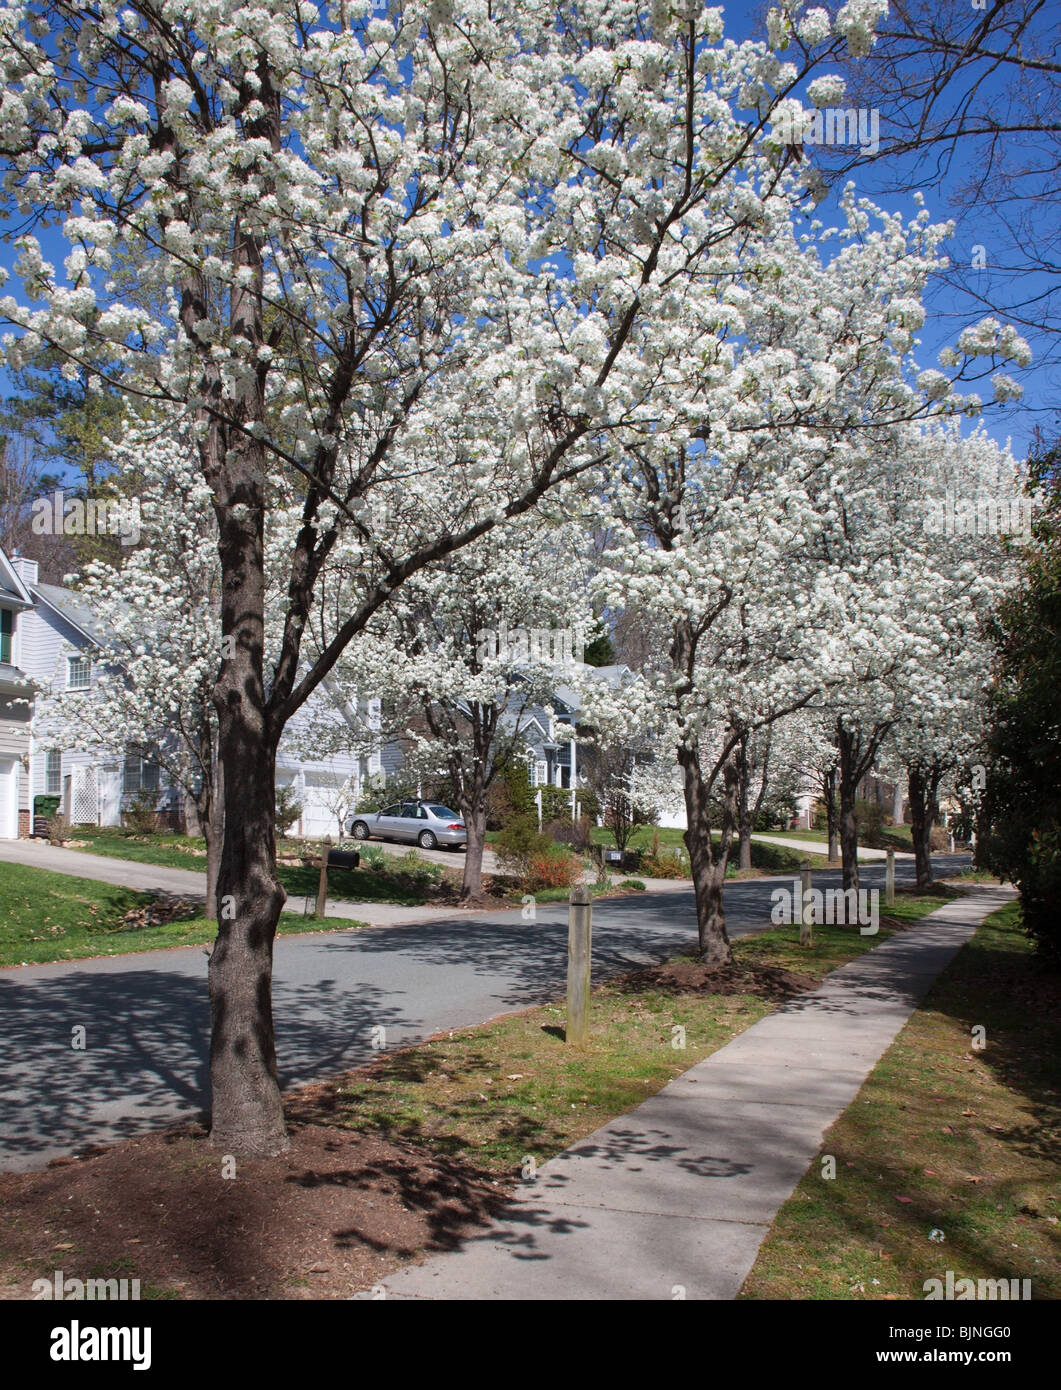 Residential street in North Carolina with Bradford Pear trees in bloom Stock Photo